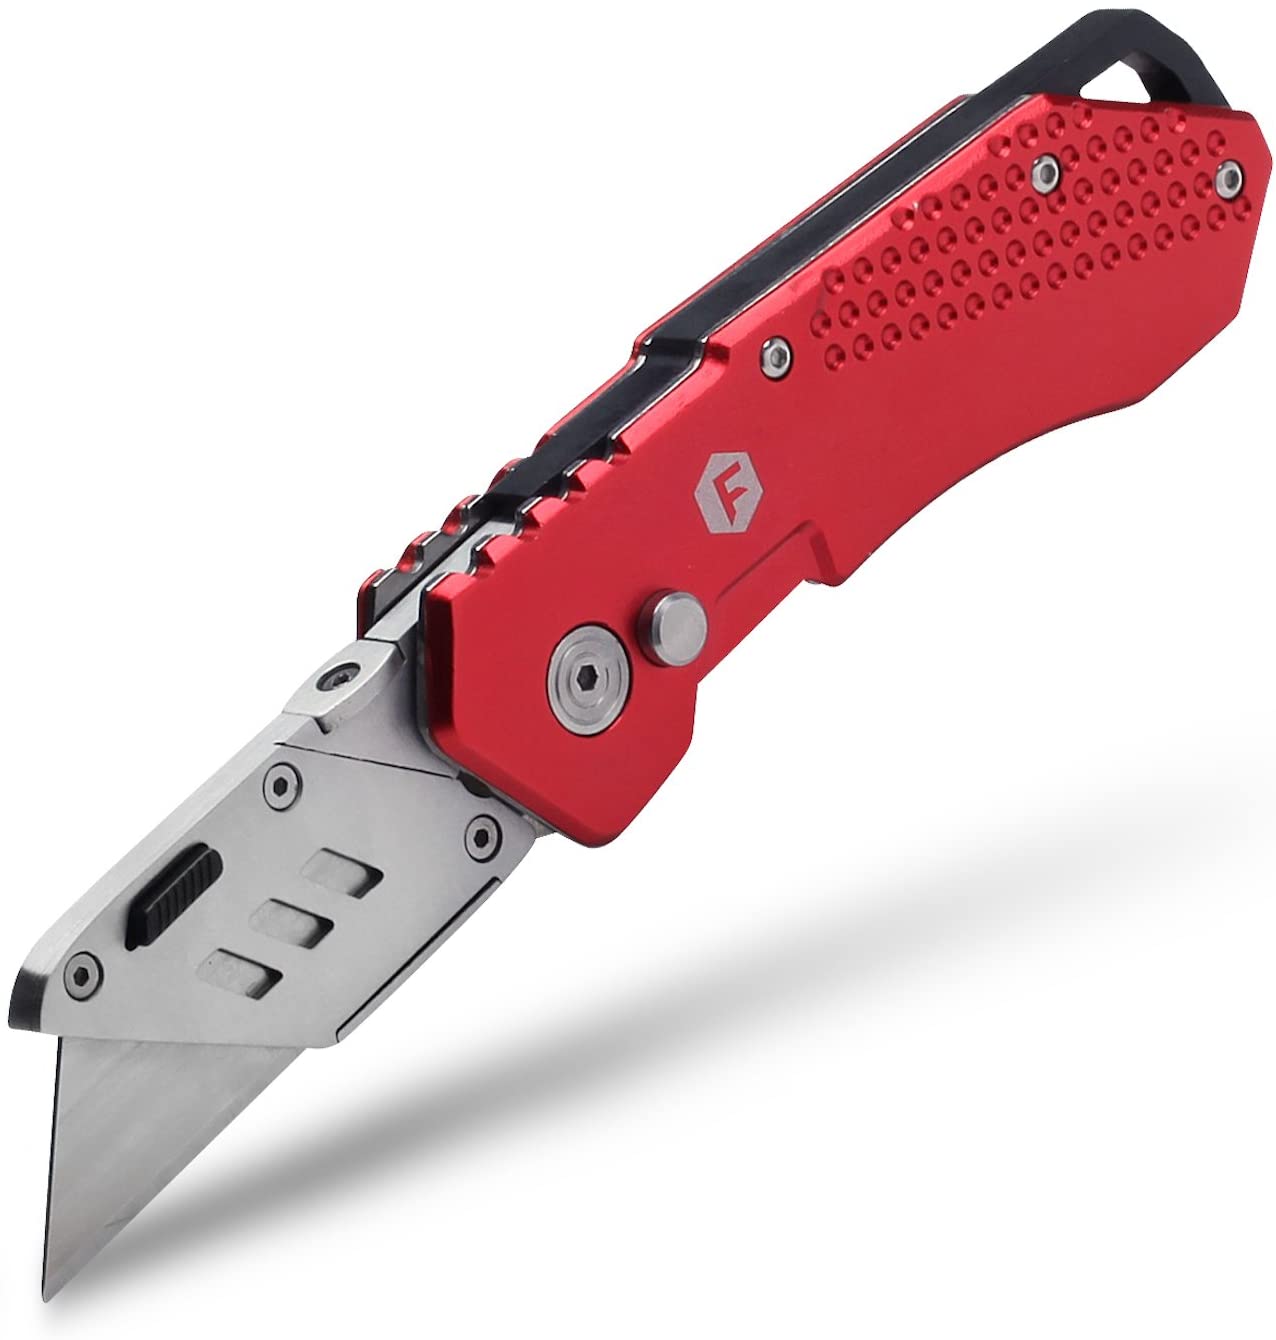 Fancii, FC Folding Pocket Utility Knife - Heavy Duty Box Cutter with Holster, Quick Change Blades, Lock-Back Design, and Lightweight Aluminum Body